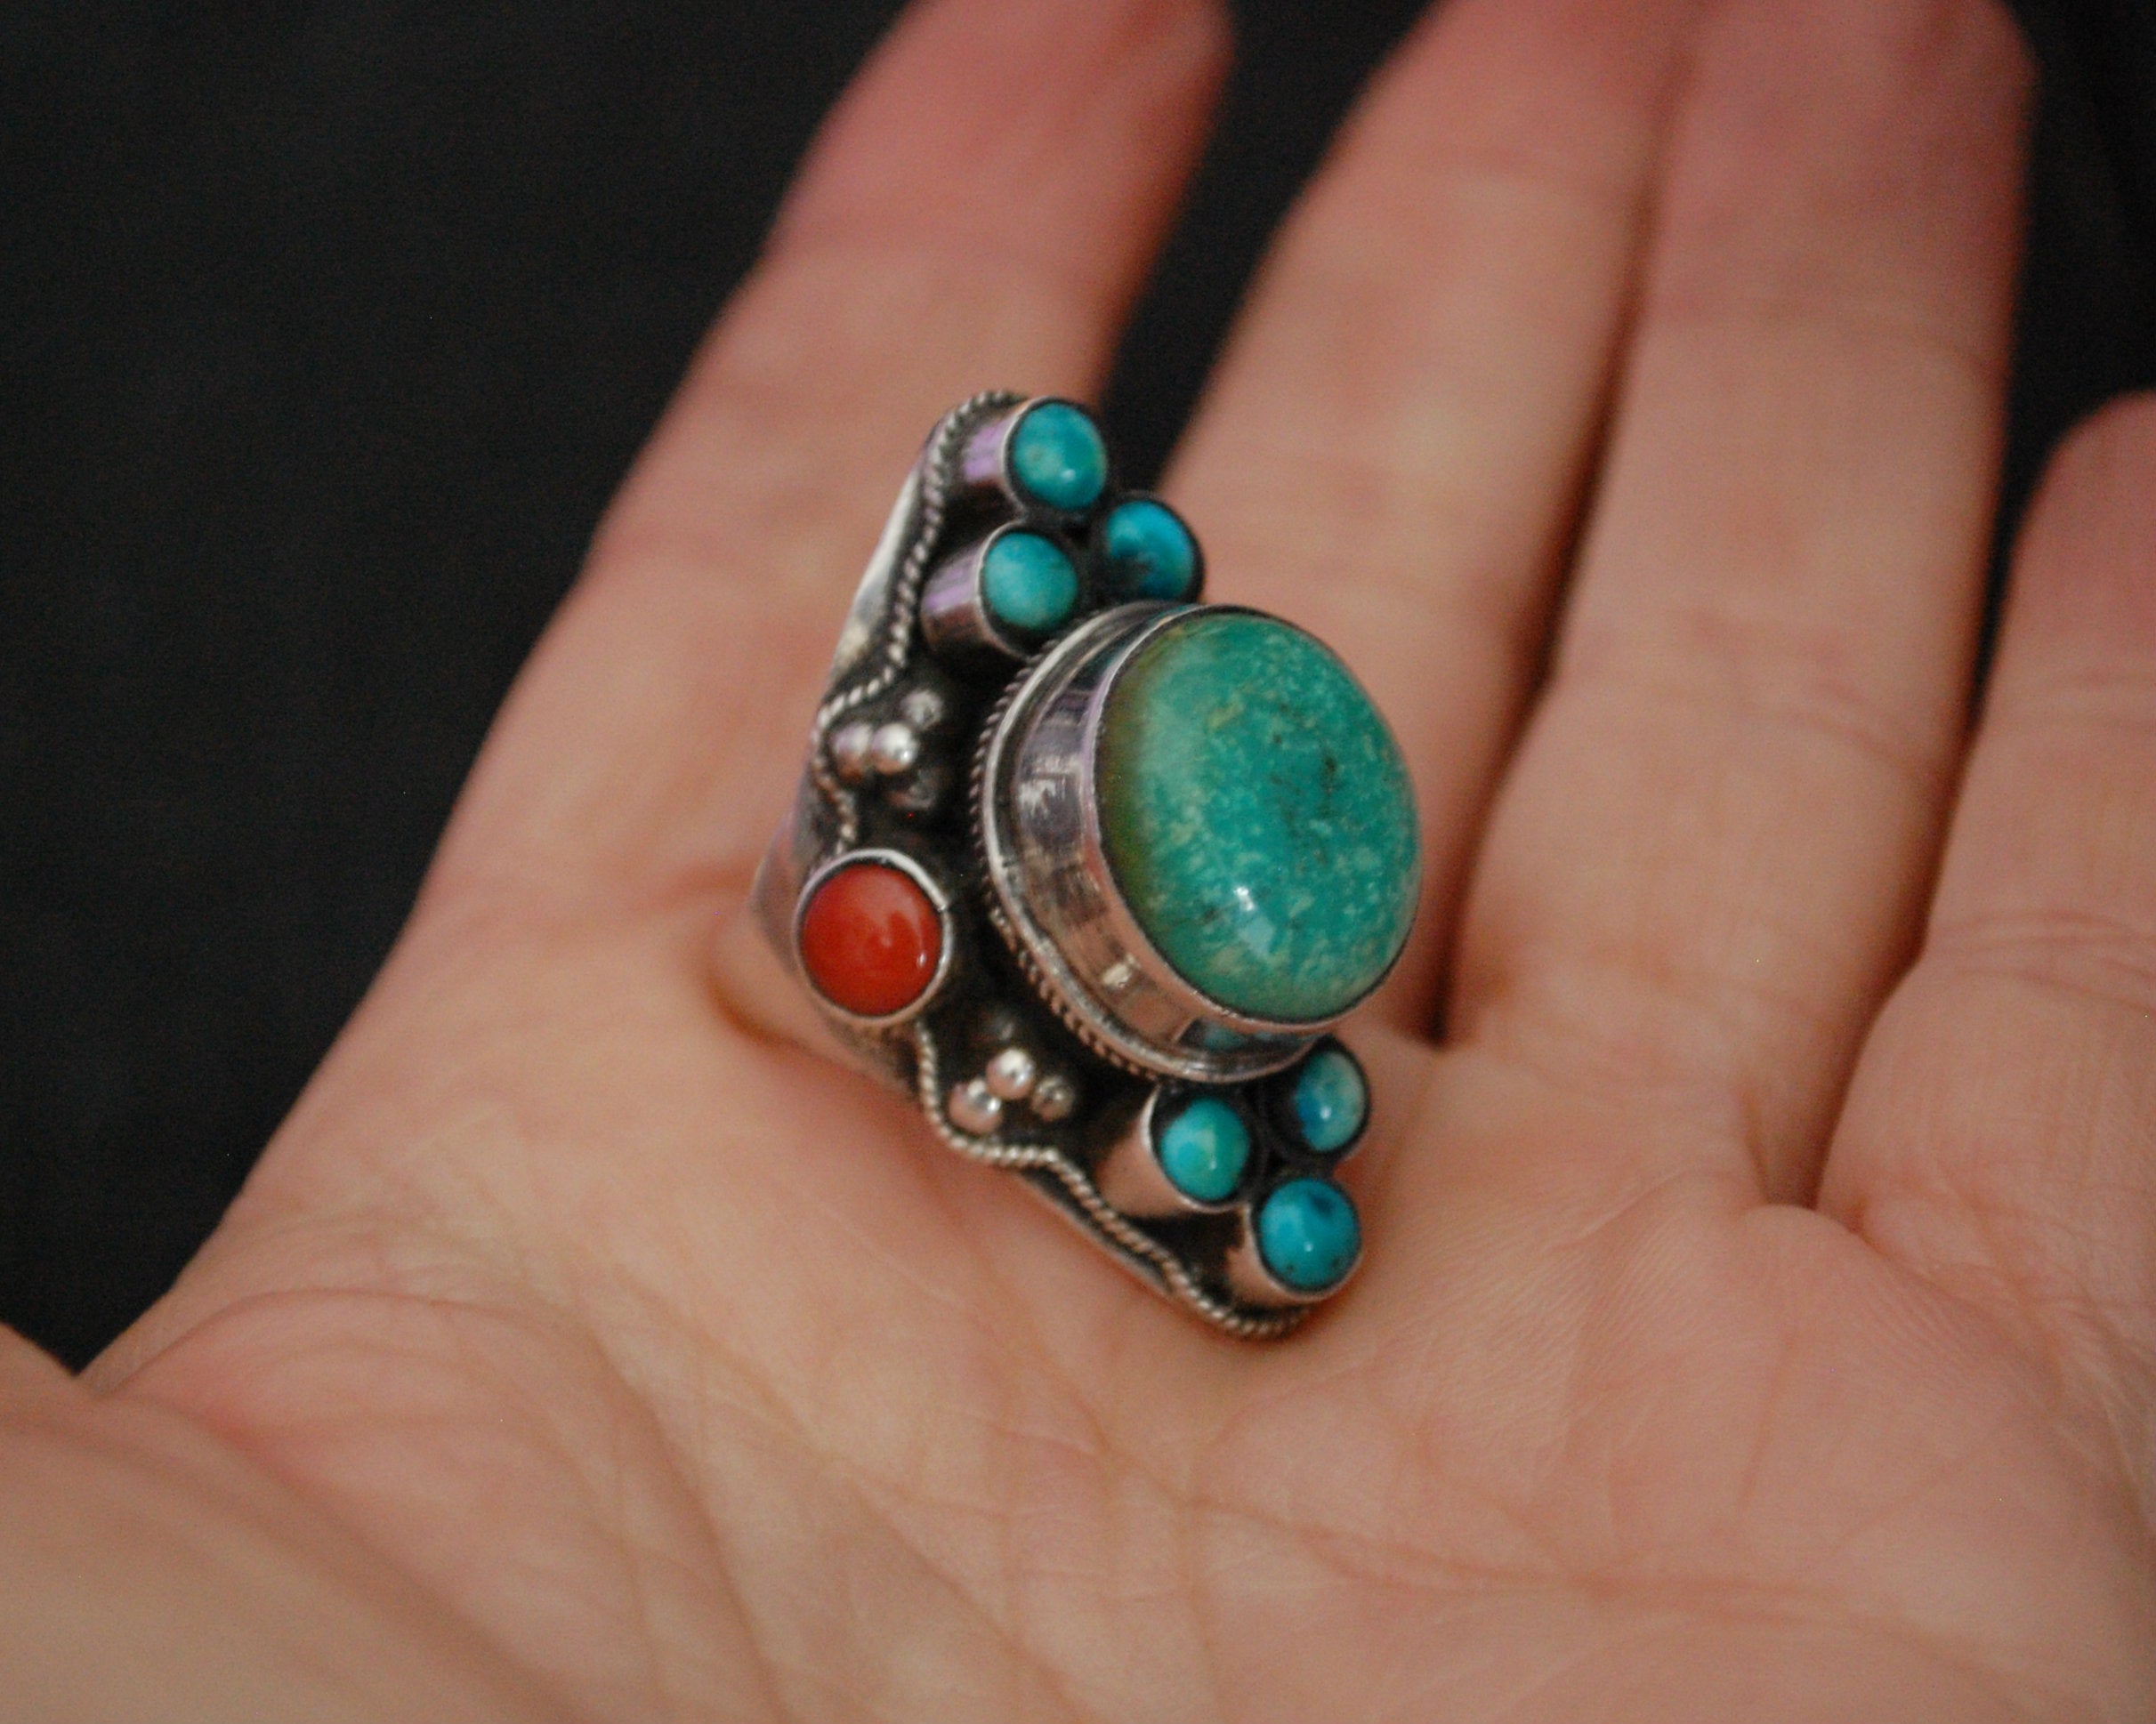 Substantial Nepali Turquoise Coral Ring - Size 8